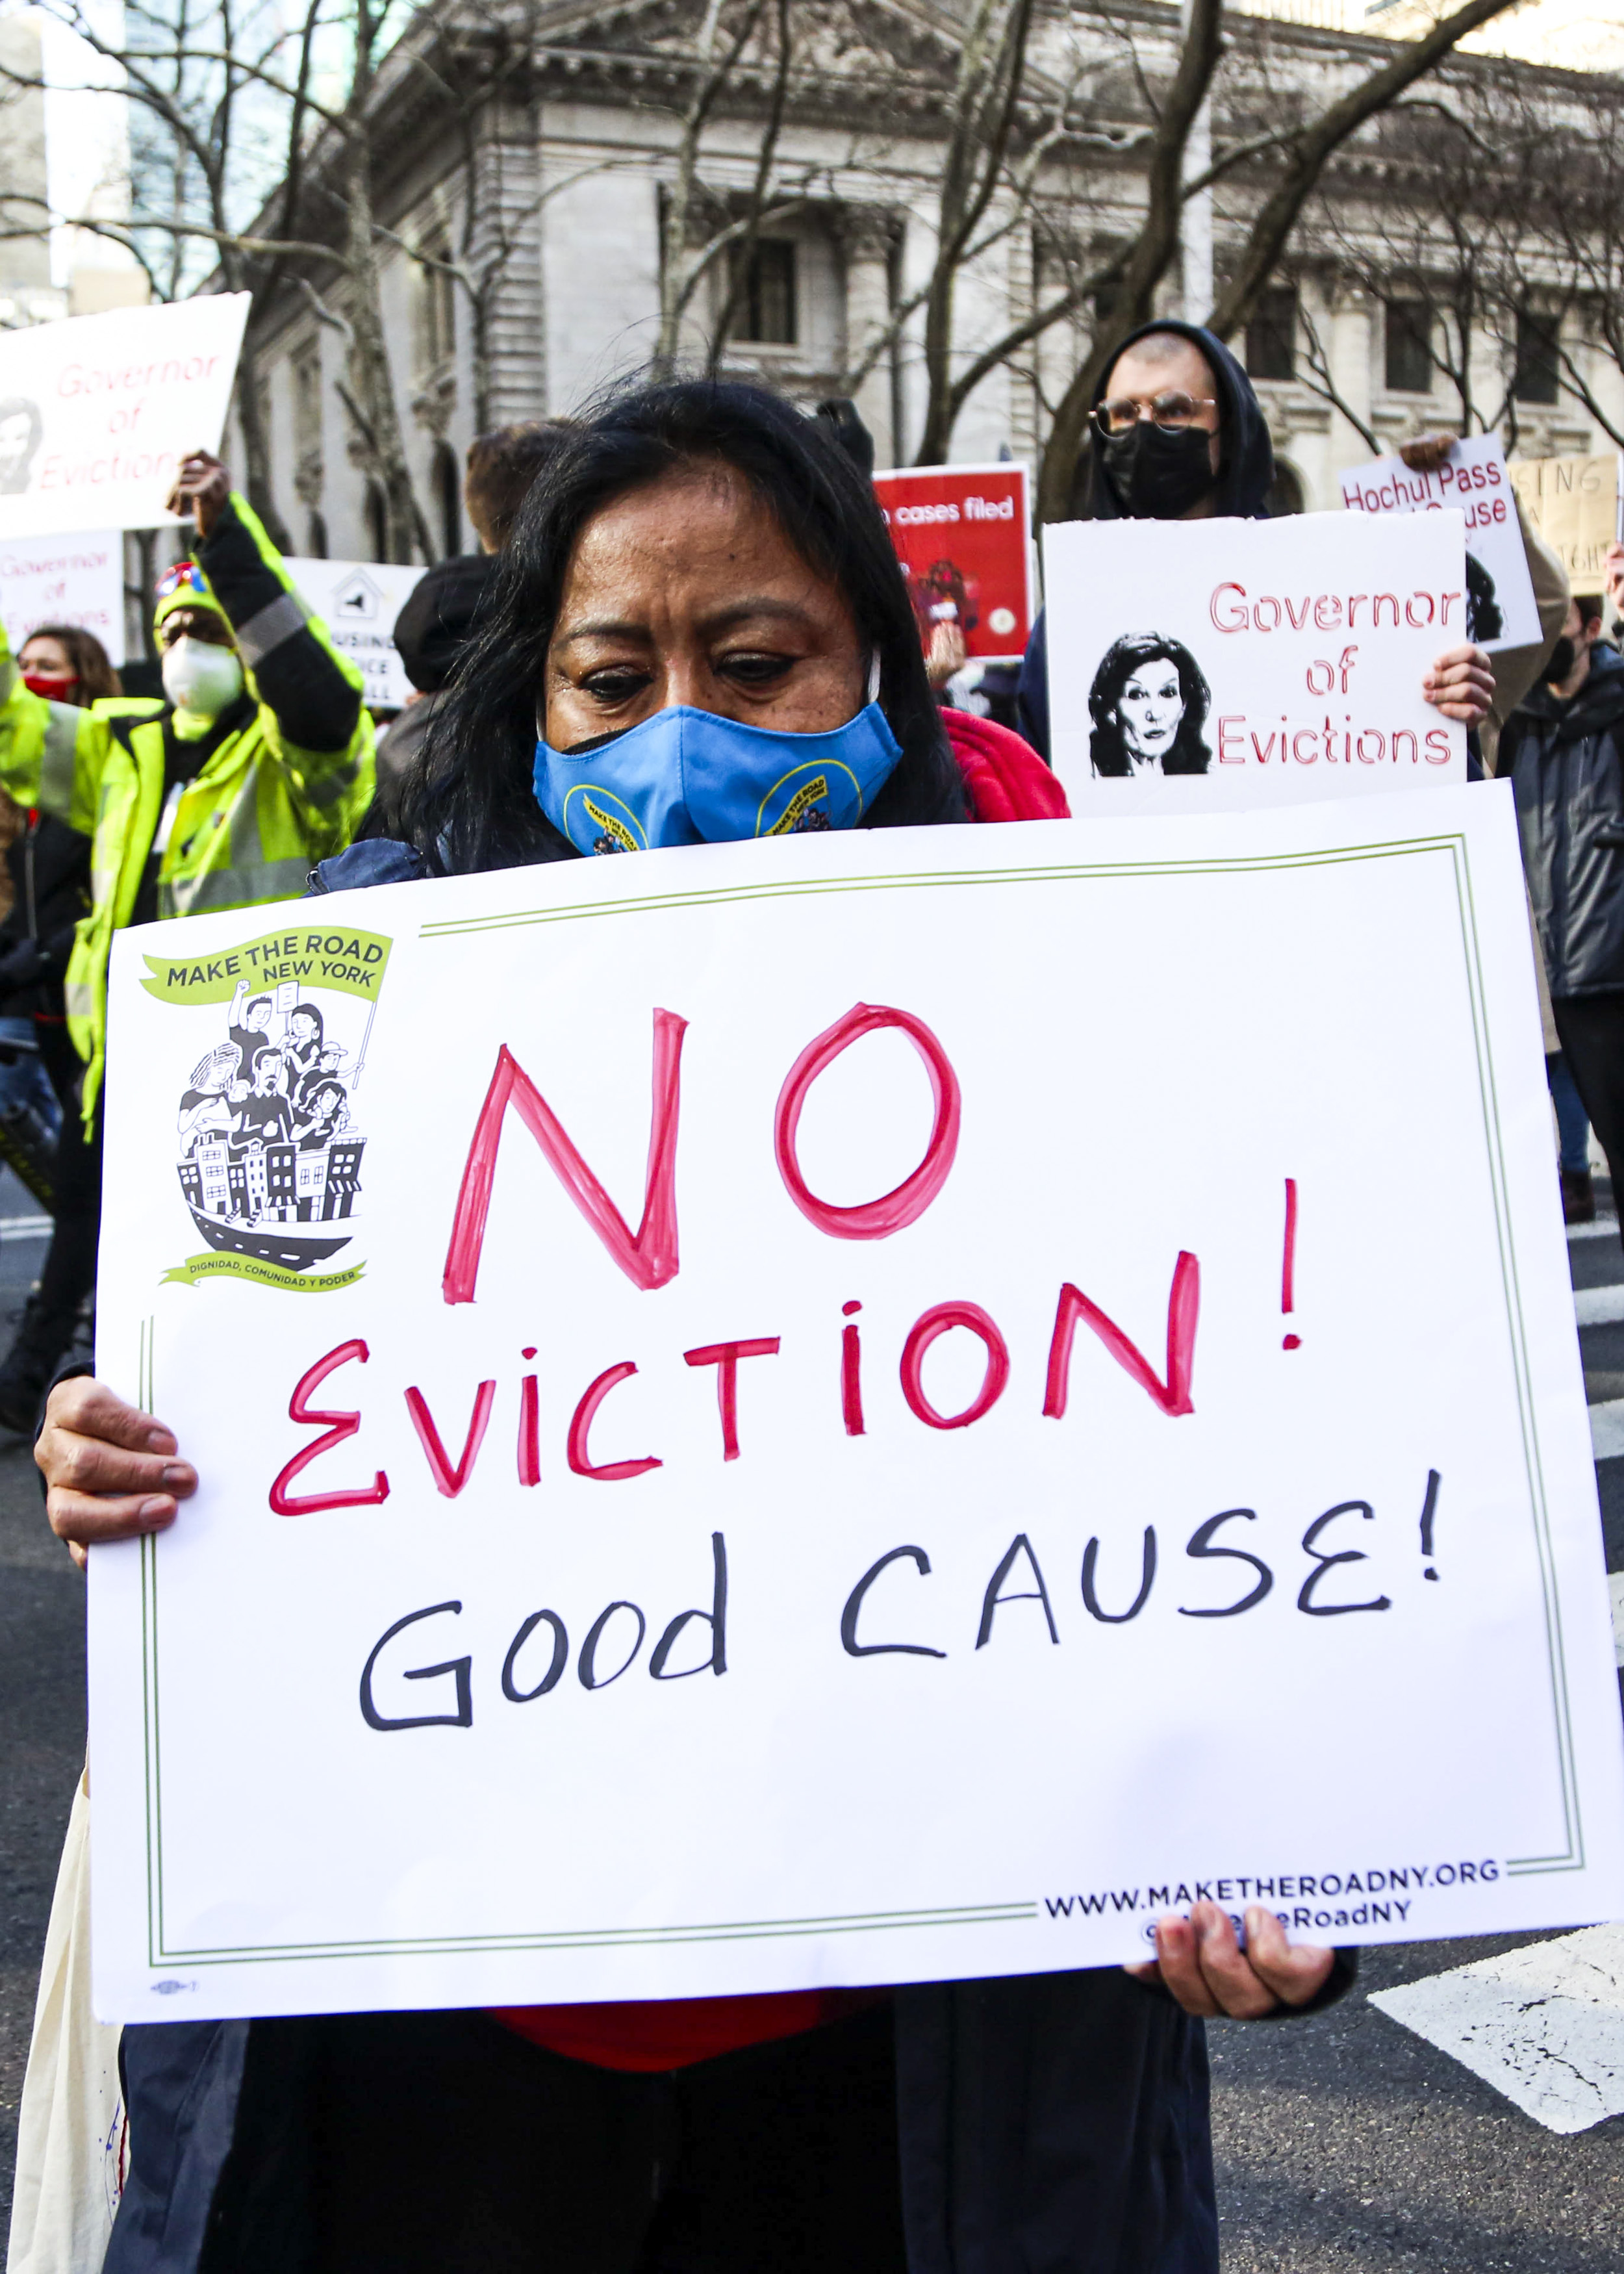 A protester holds a sign that reads “No eviction! Good cause!” at a housing justice march in New York City.